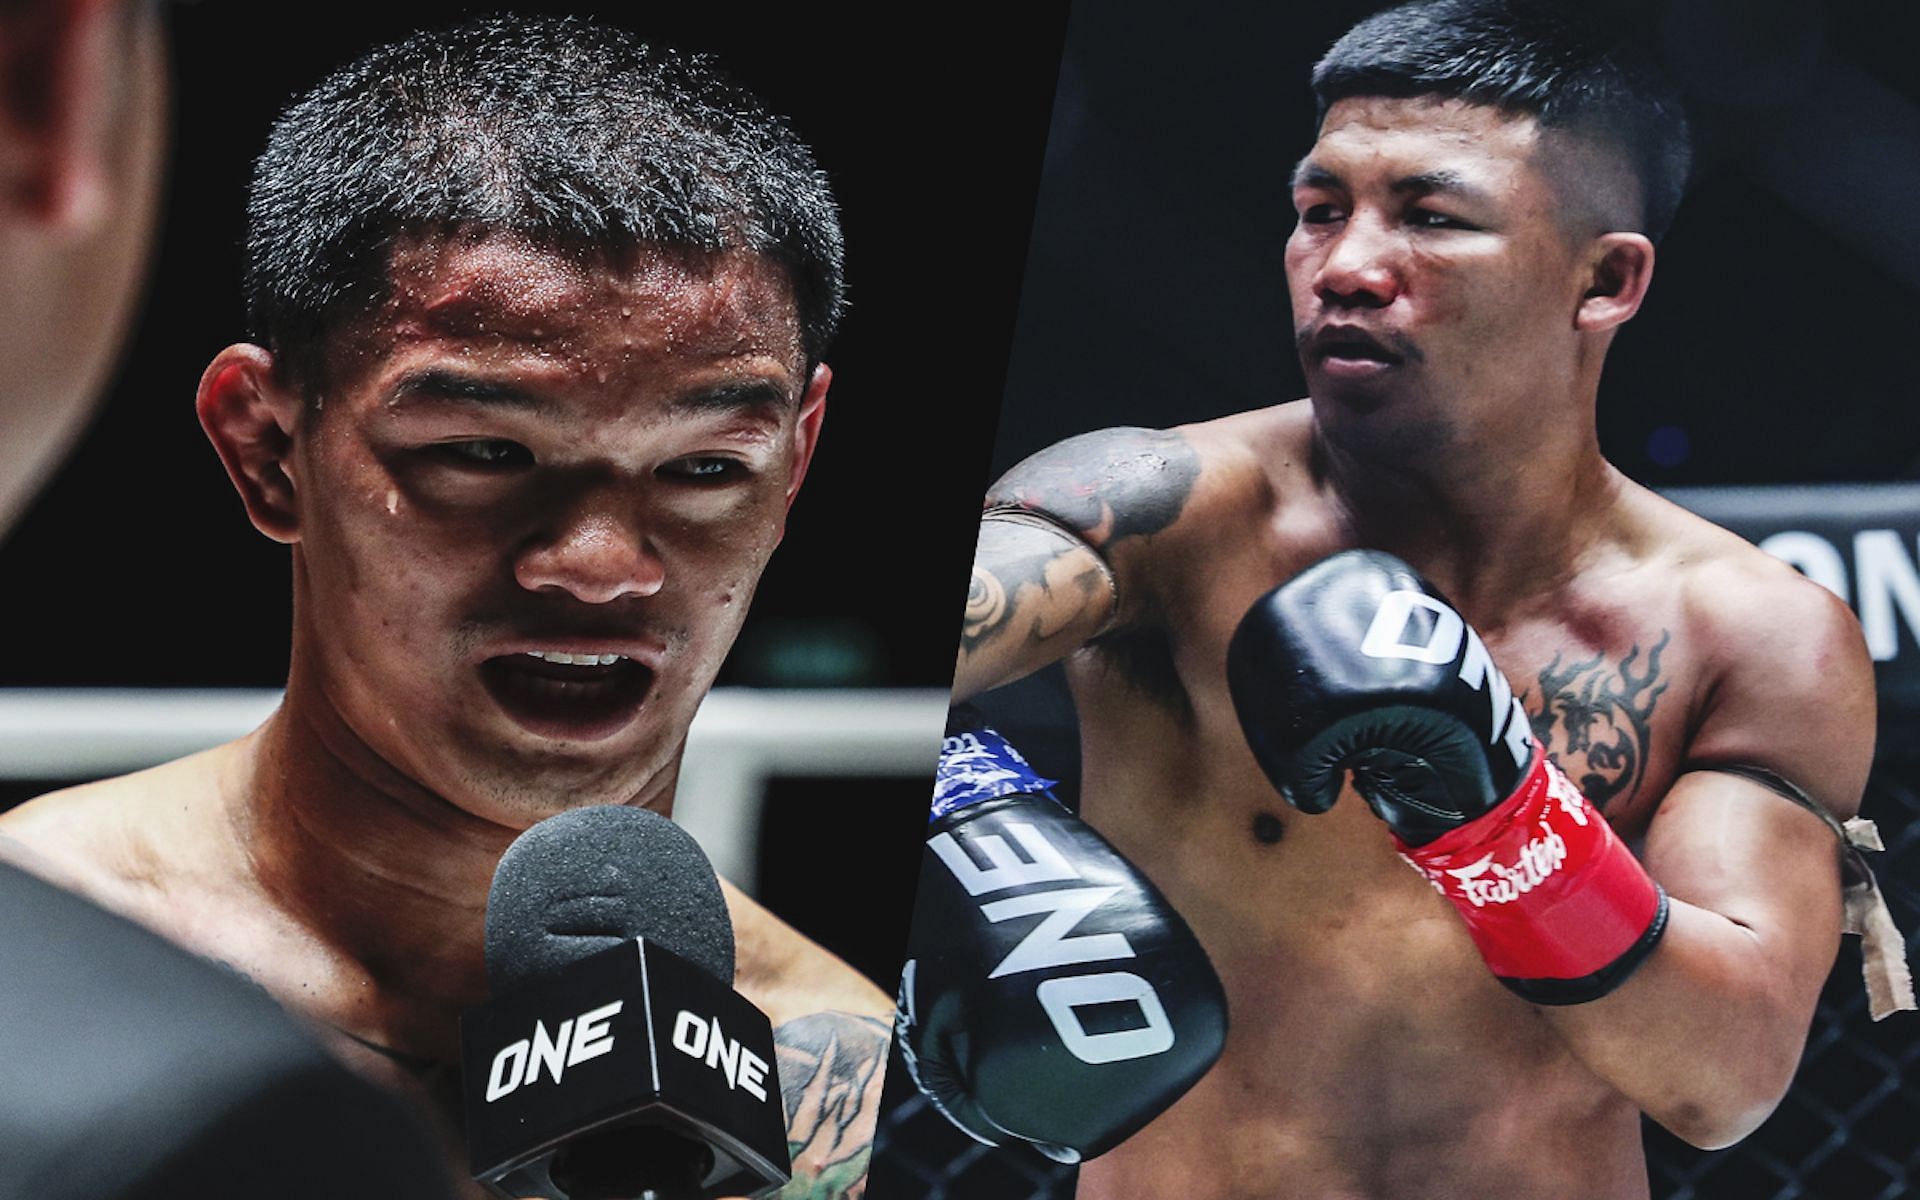 Kongthoranee Sor Sommai (left) defends the performance of his Thai compatriot and superstar Rodtang (right). 